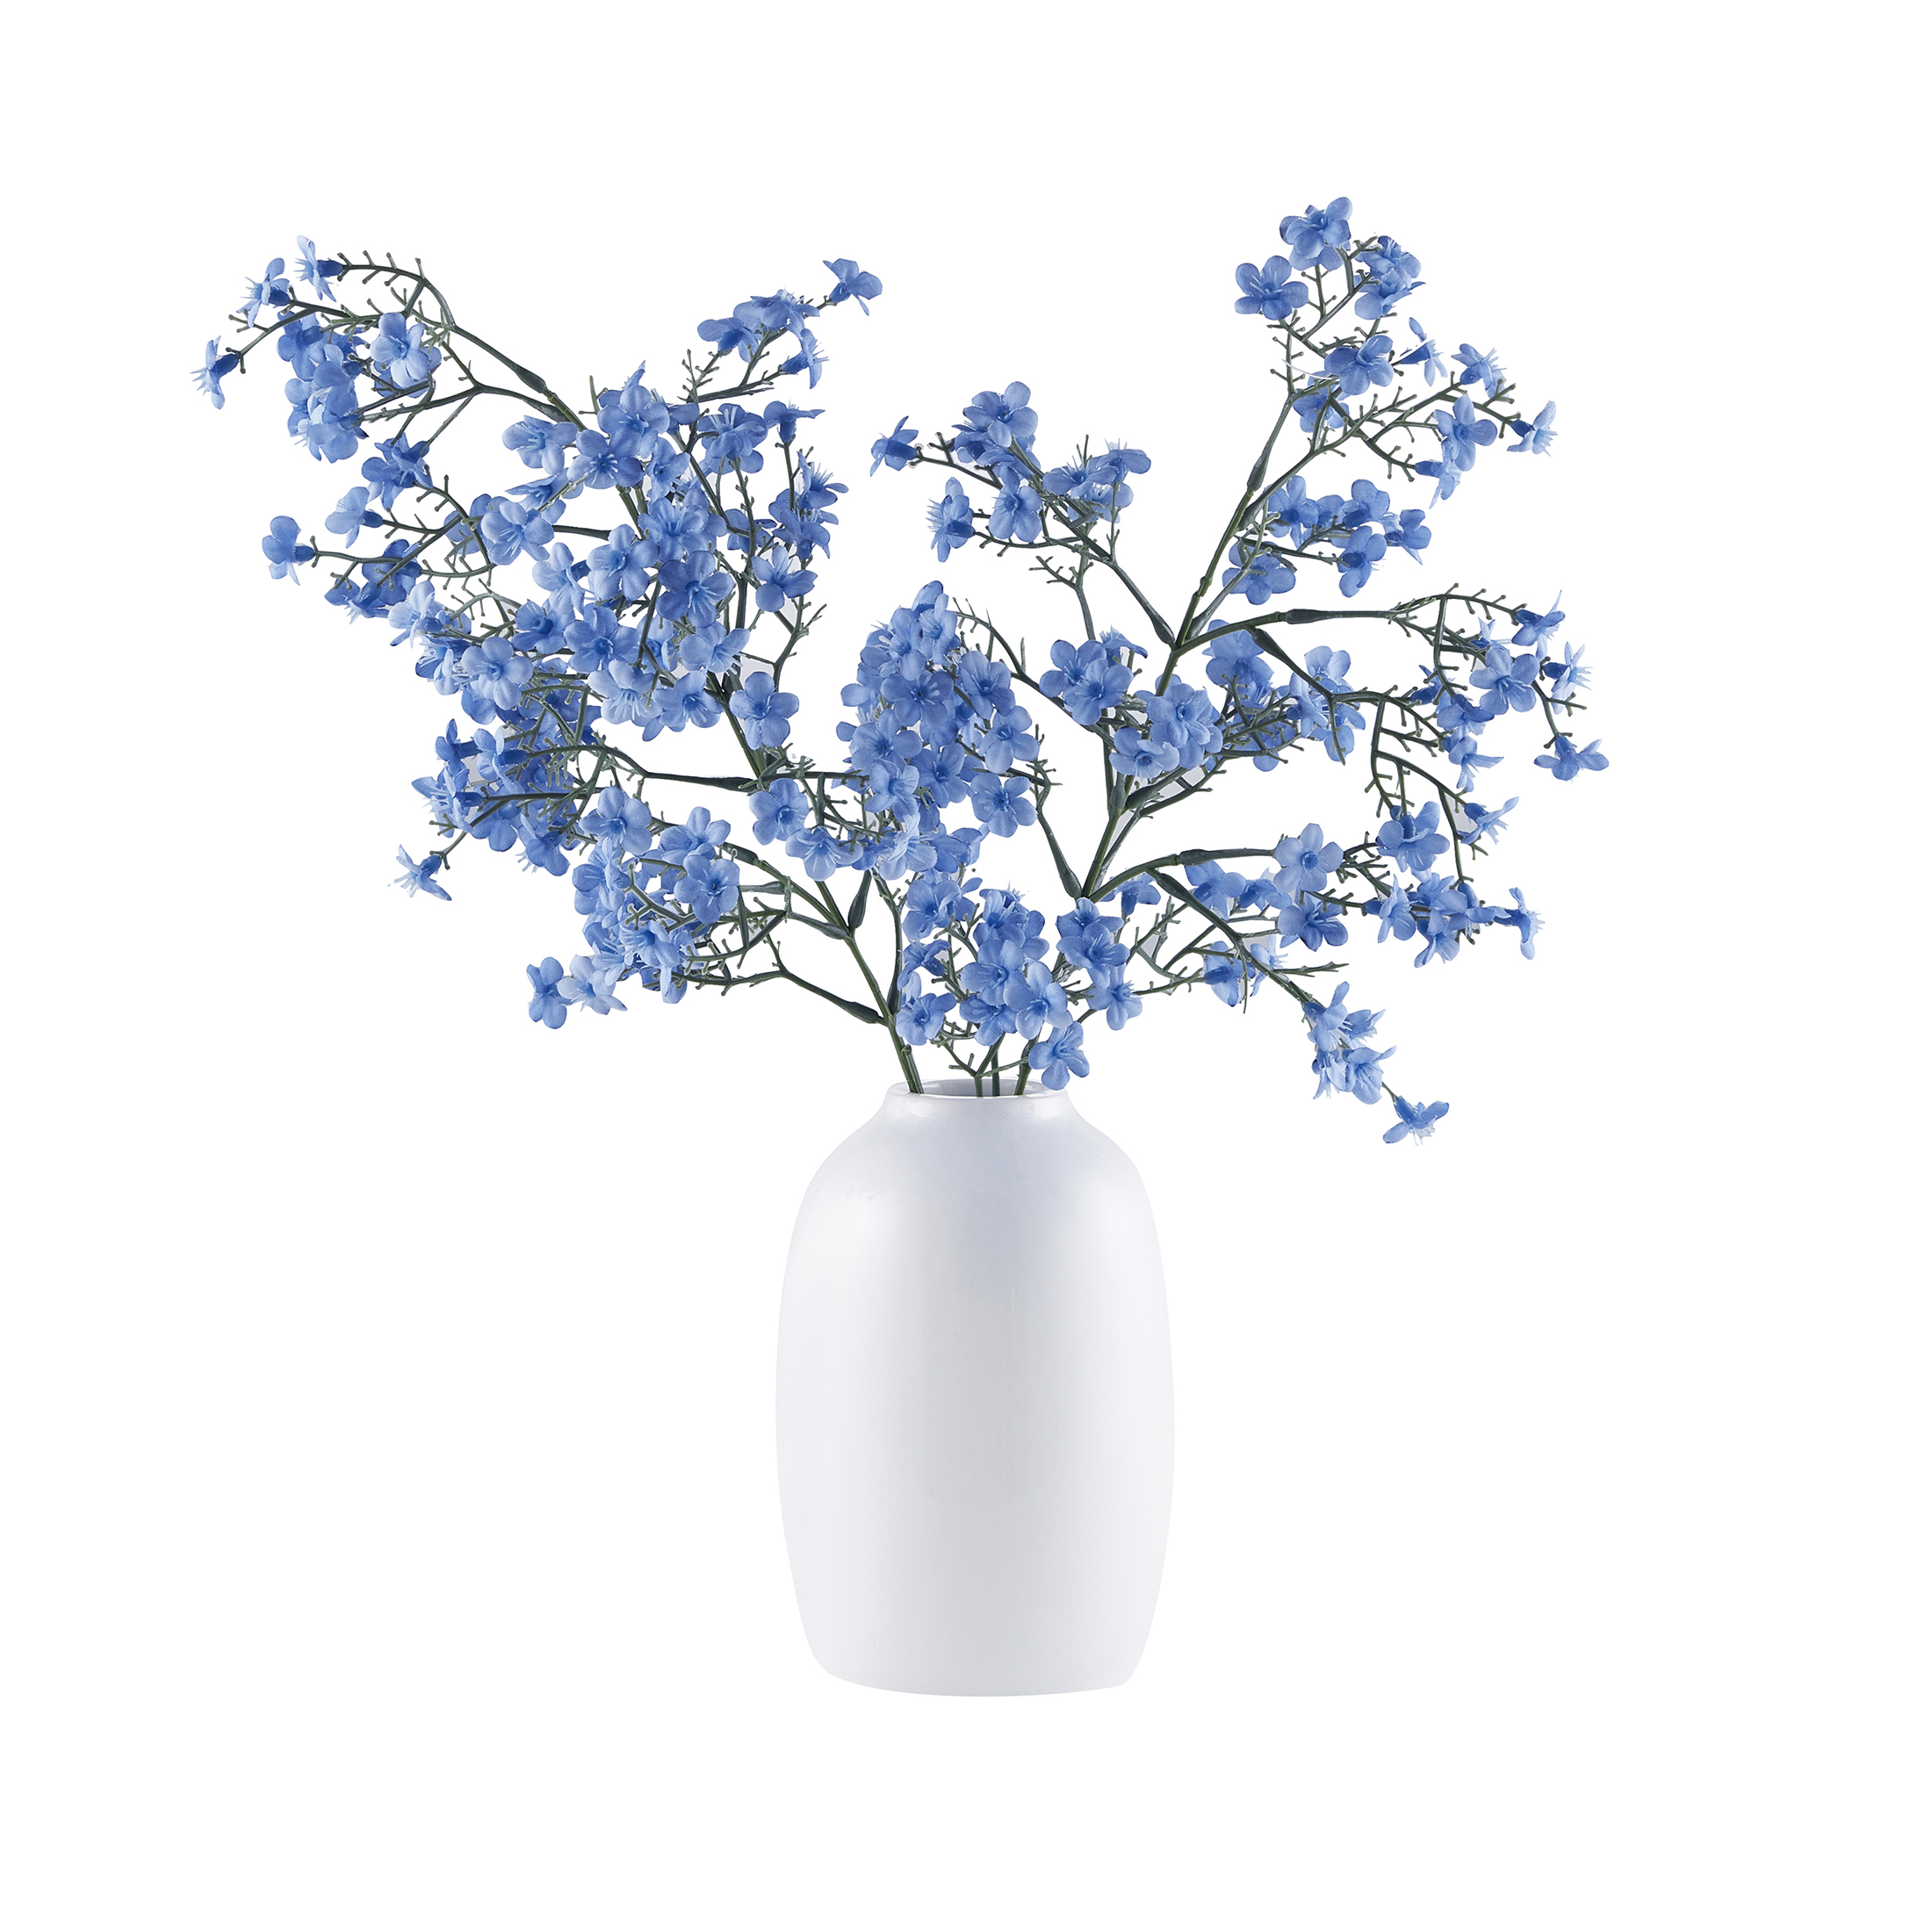 My Texas House Blue Faux Floral Springs in White Ceramic Vase, 16" Height - image 1 of 7